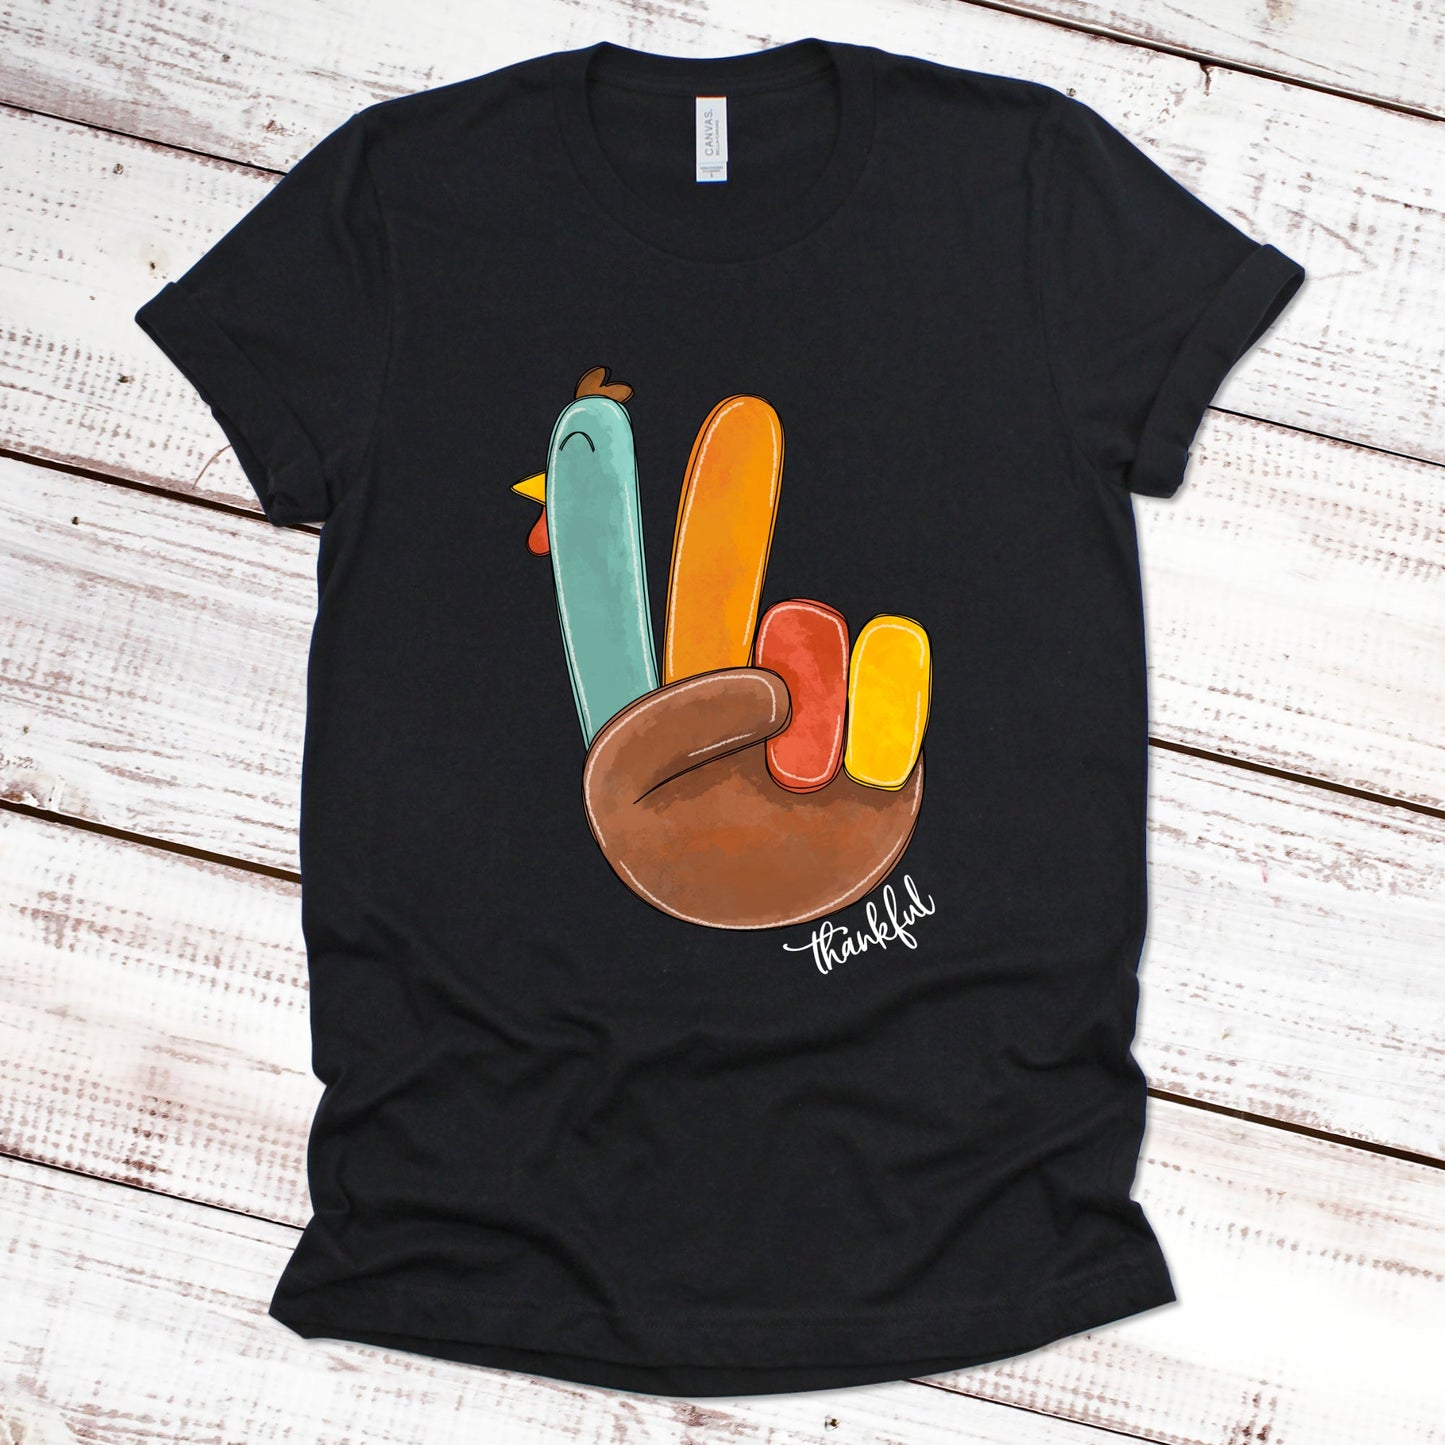 Thankful Peace-Sign Turkey Thanksgiving Shirt Great Giftables Black XS 